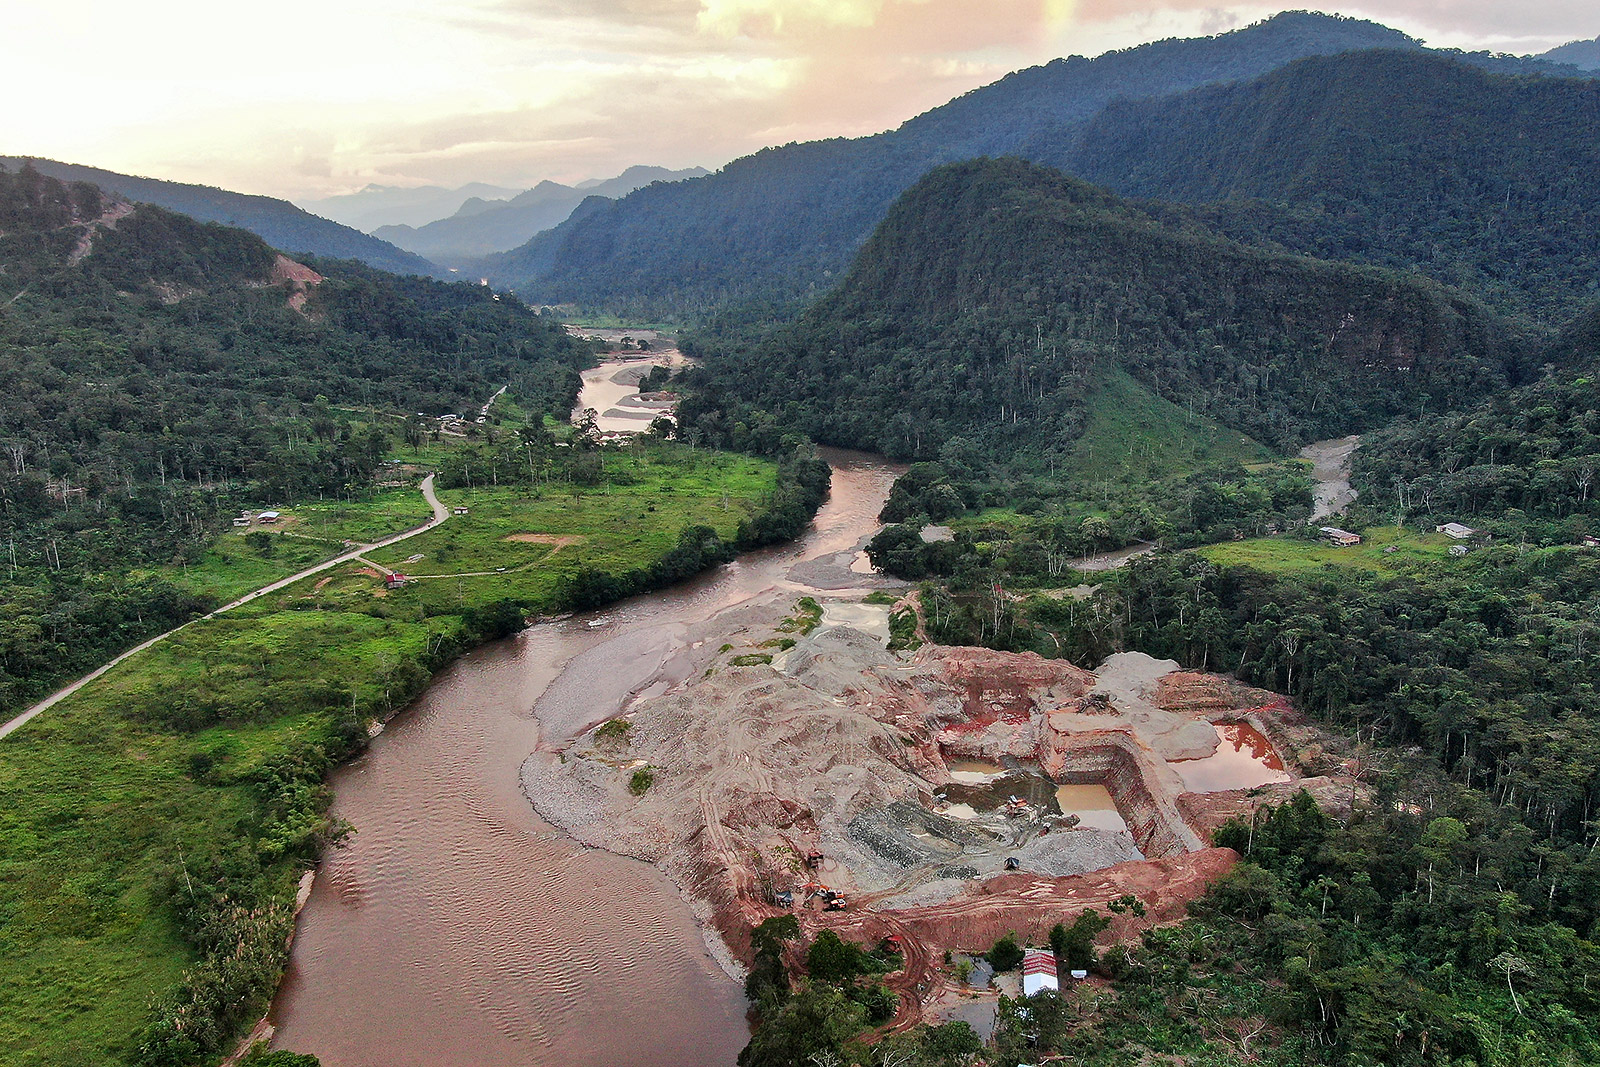 Image showing an illegal gold mining operation along the shores of the Nangaritza River